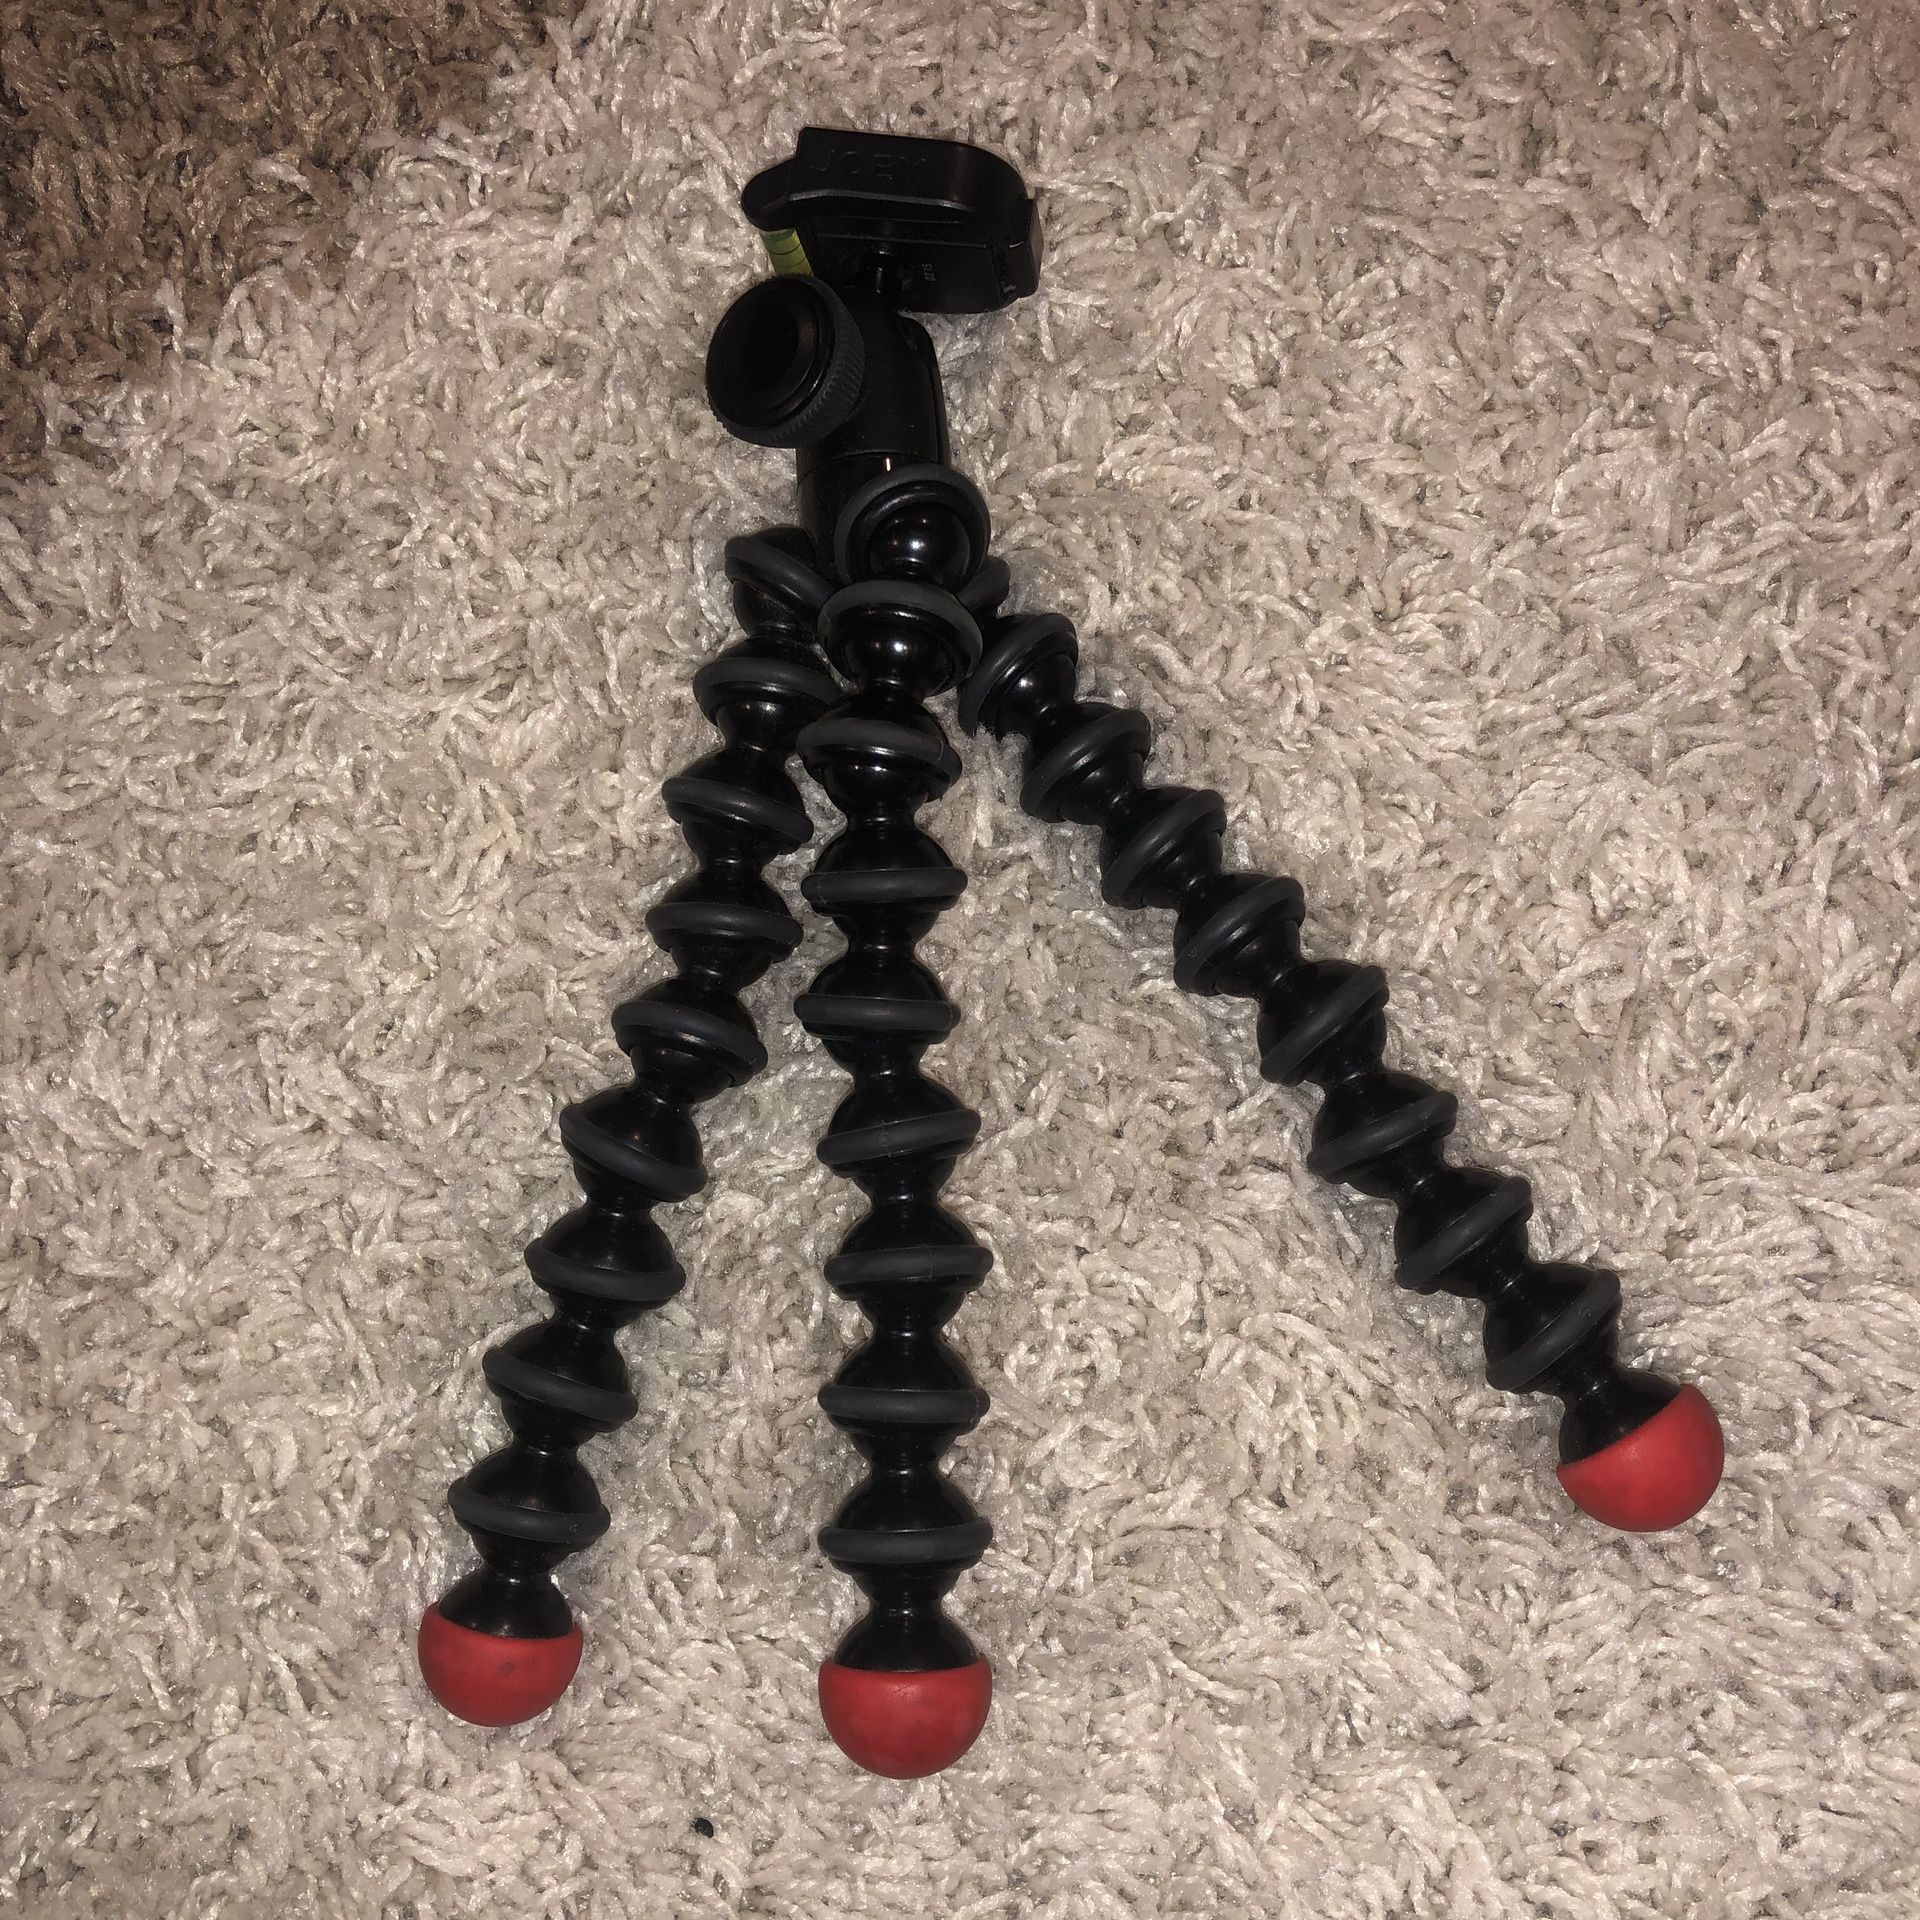 Joby gorilla Tripod for GoPro and Cameras